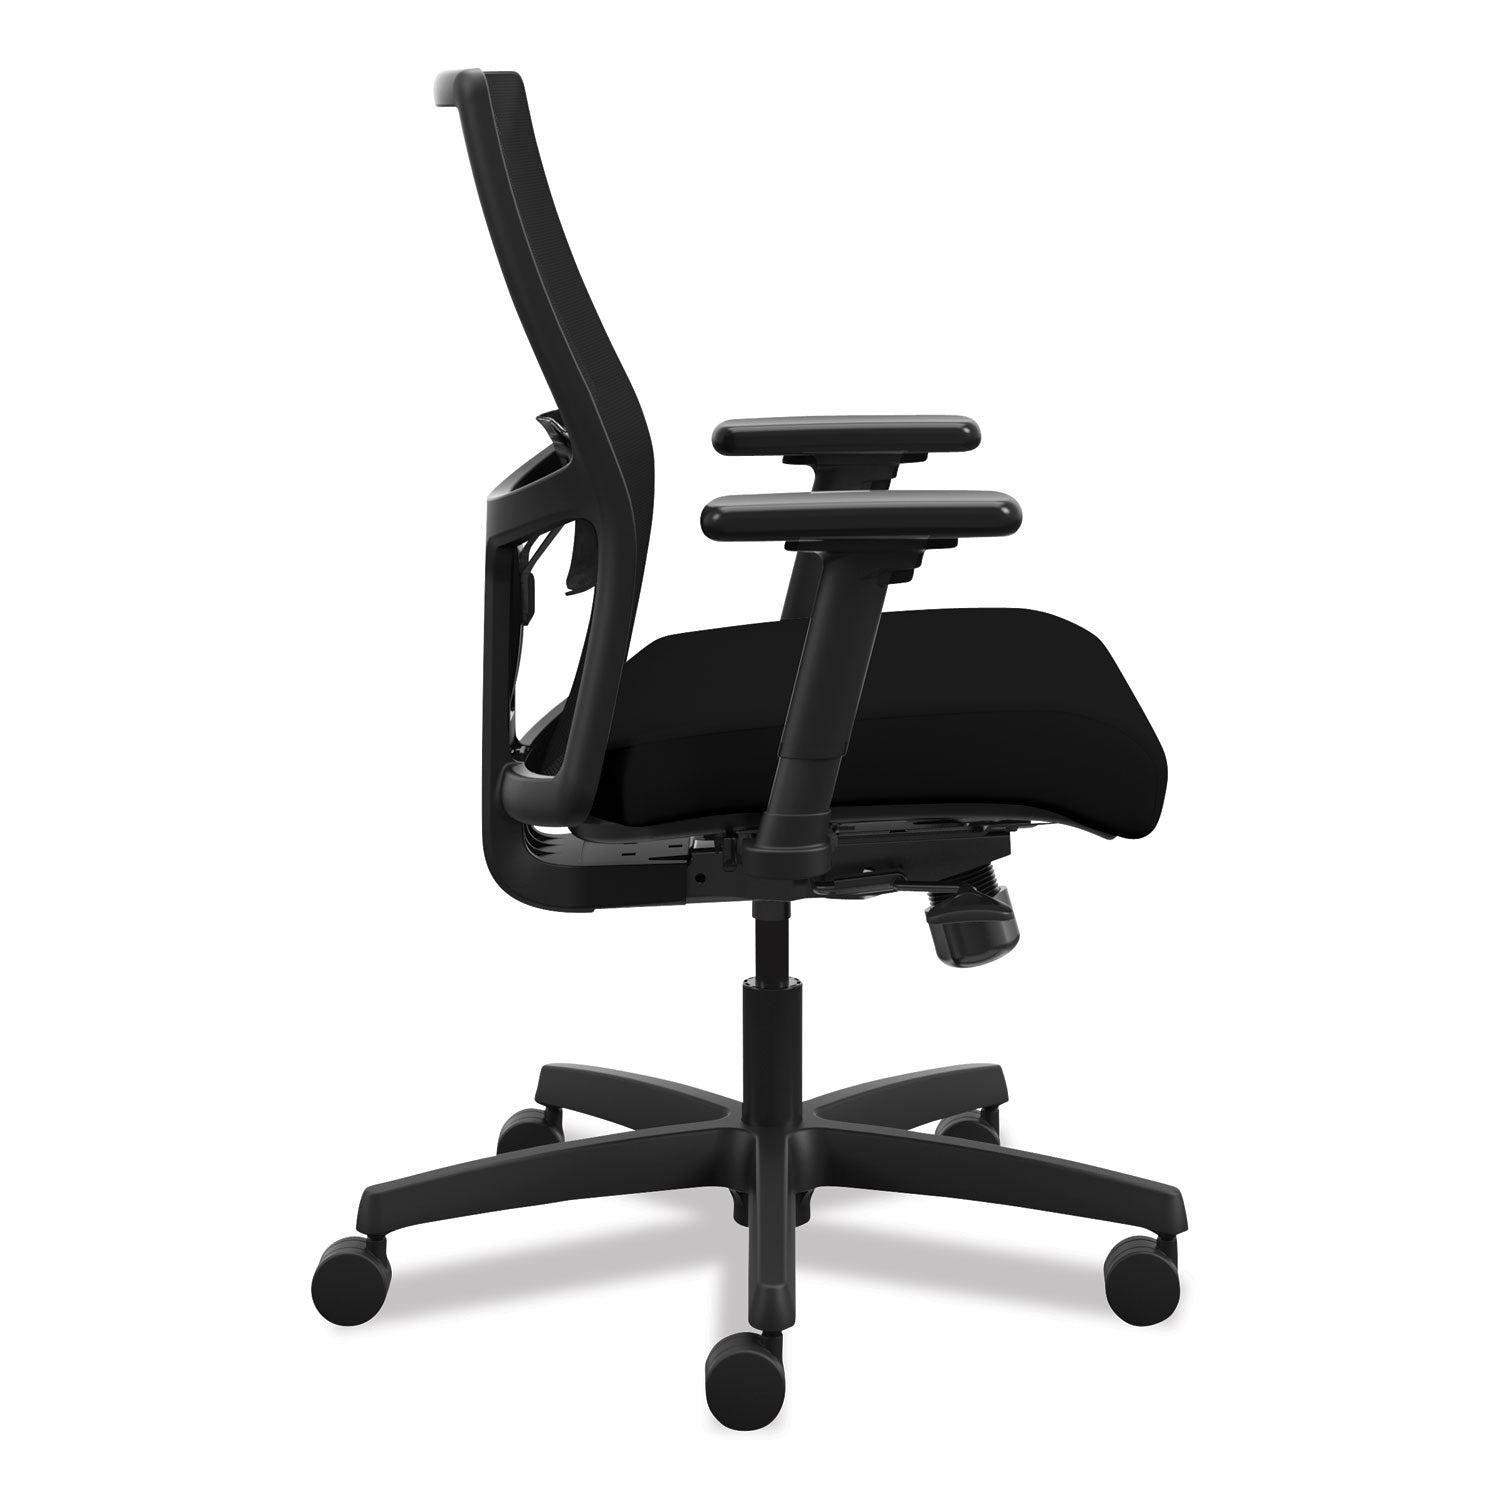 ignition-20-4-way-stretch-low-back-mesh-task-chair-supports-up-to-300-lb-1675-to-2125-seat-height-black_honitlmk1mc10b - 3